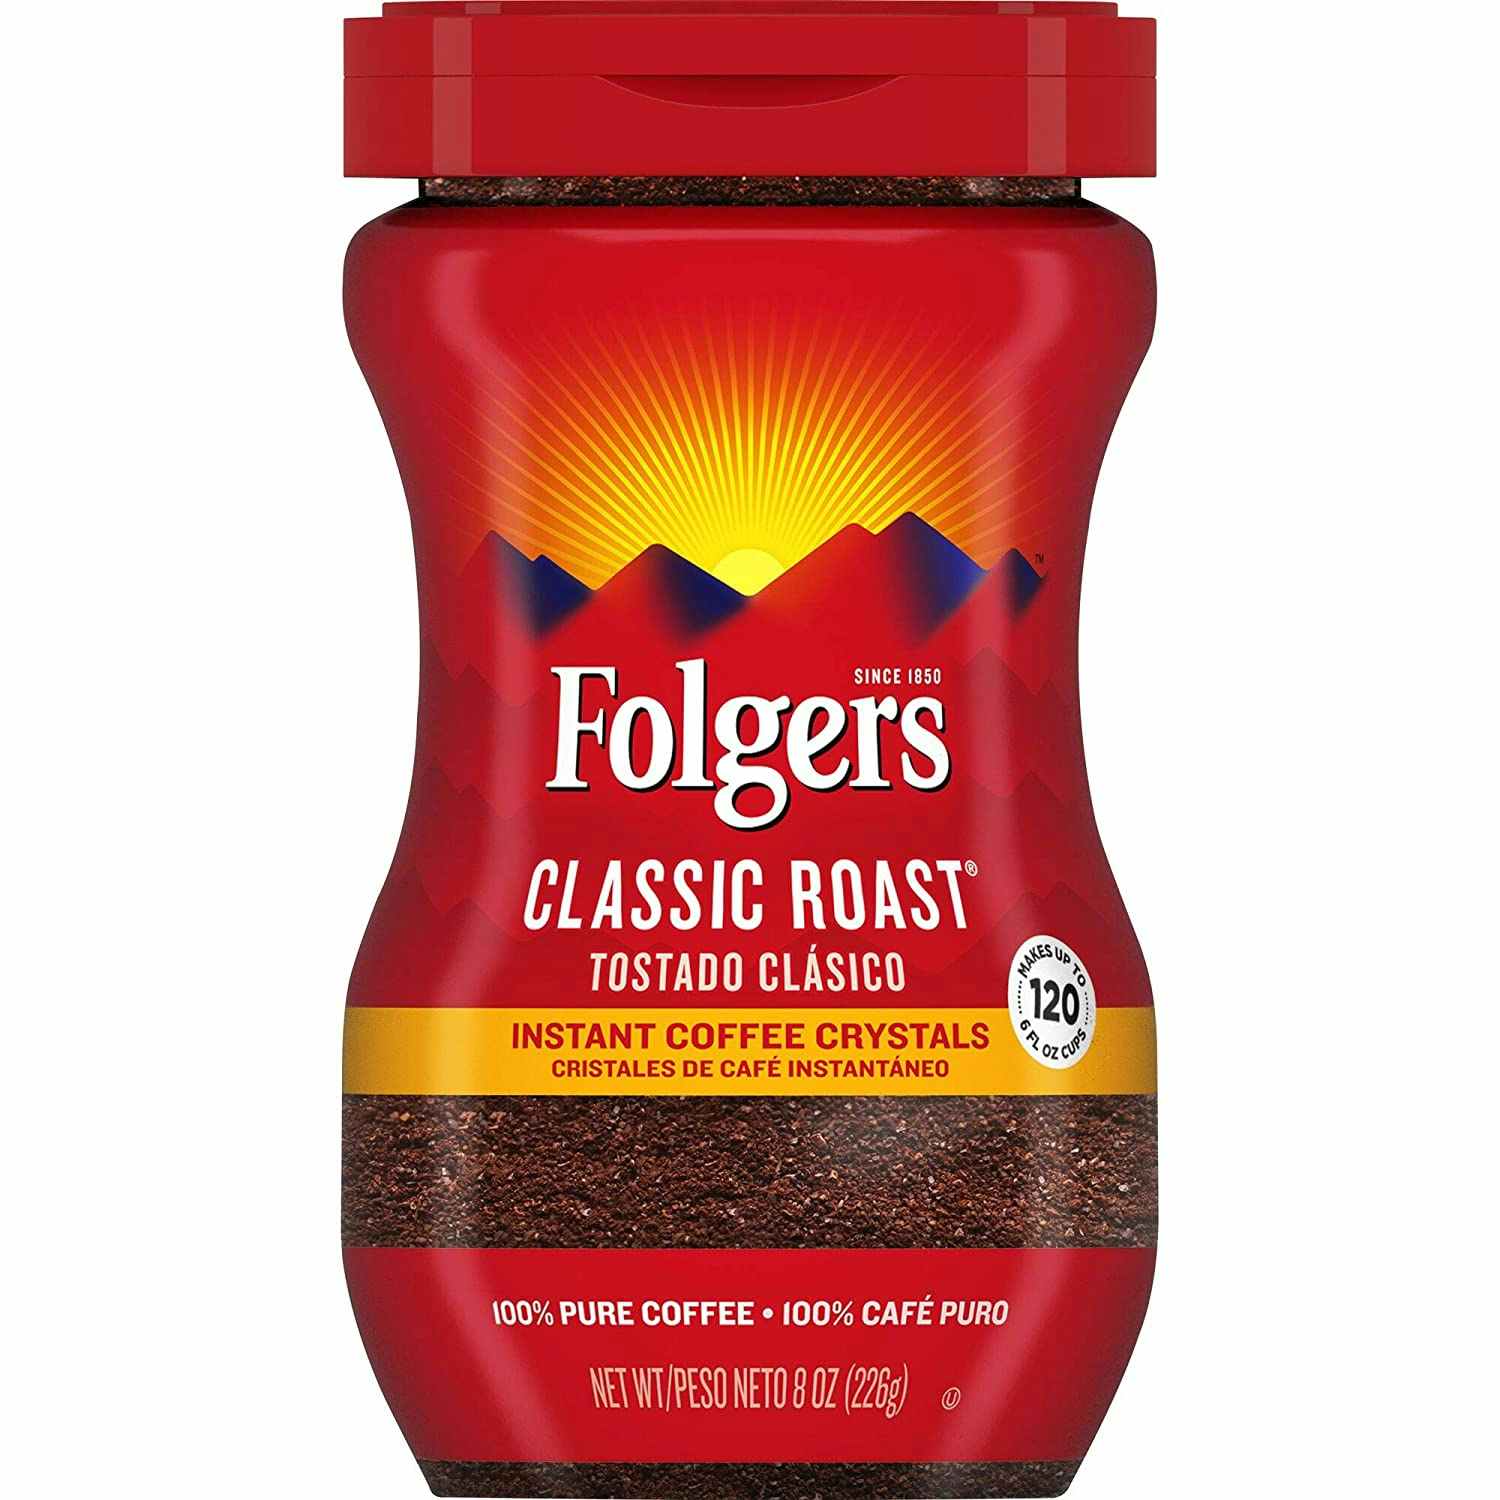 An 8 ounce container of Folgers instant coffee